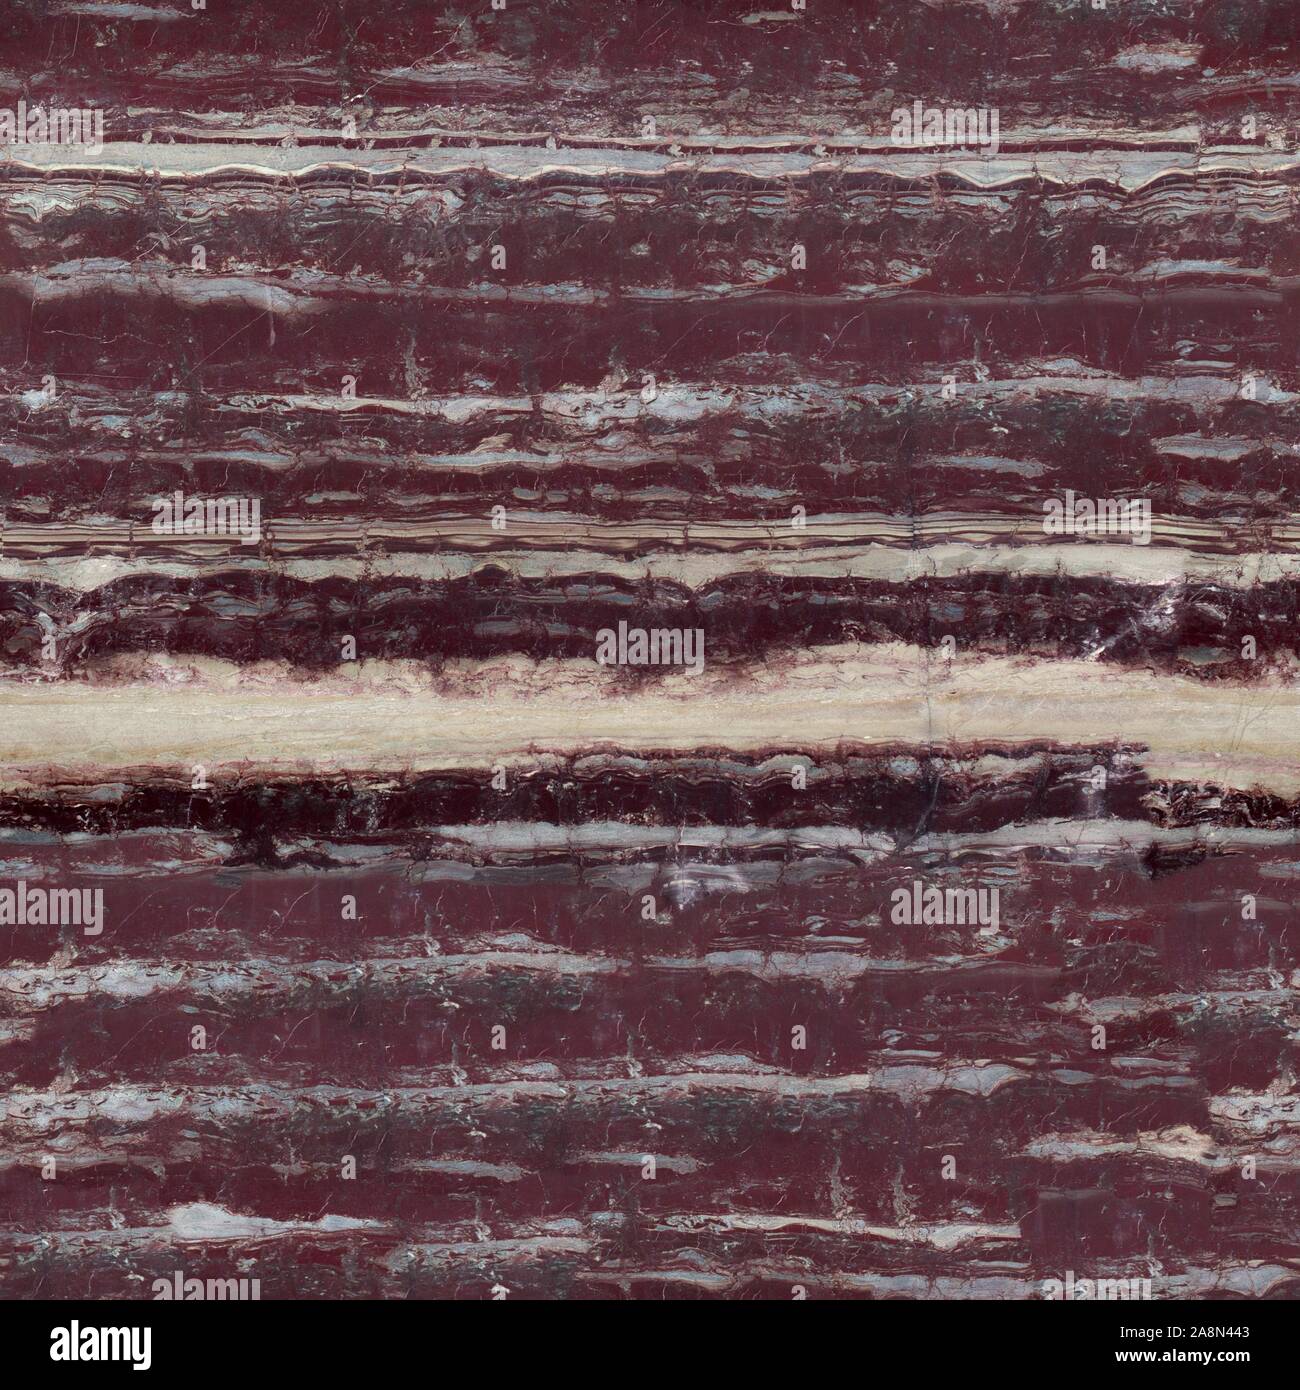 Patterned granite texture with violet tone. Seamless square background, tile ready. Stock Photo